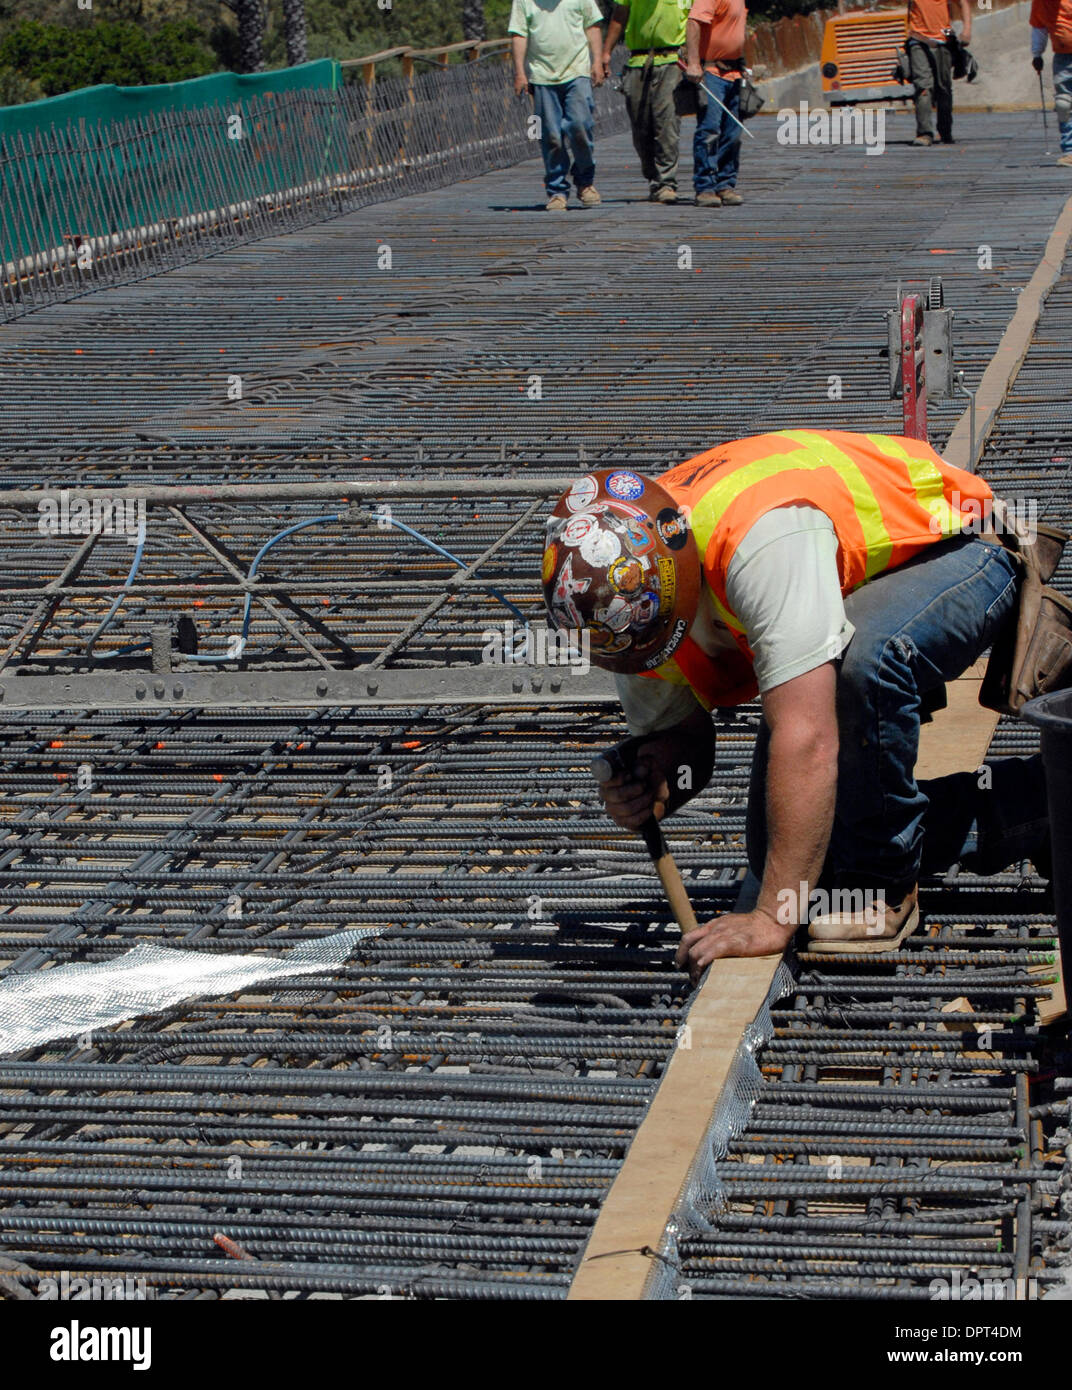 Brian Merryman works on a bridge over Mission Boulevard (238) along Interstate 680 in Fremont, Calif., on Monday, April 20, 2009. The freeway is being widened to create High Occupancy Toll lanes that will allow non-carpool drivers to pay via transponder to access the lane. Those who carpool will continue to use the lane for free. (Cindi Christie/Staff) Stock Photo